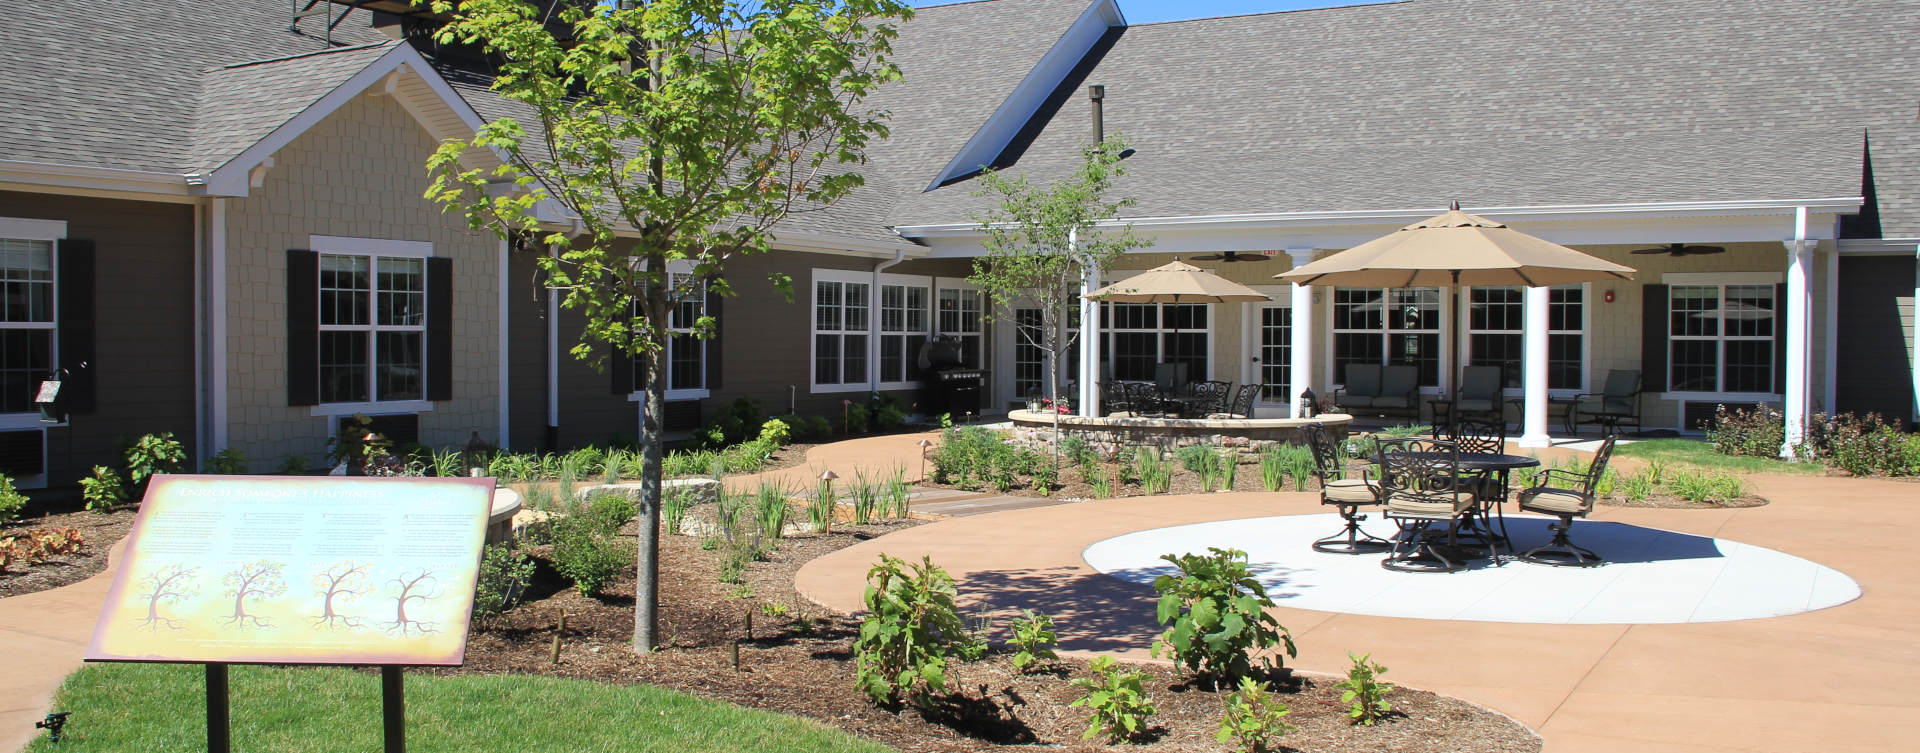 Enjoy the outdoors in a whole new light by stepping into our secure courtyard at Bickford of Tinley Park